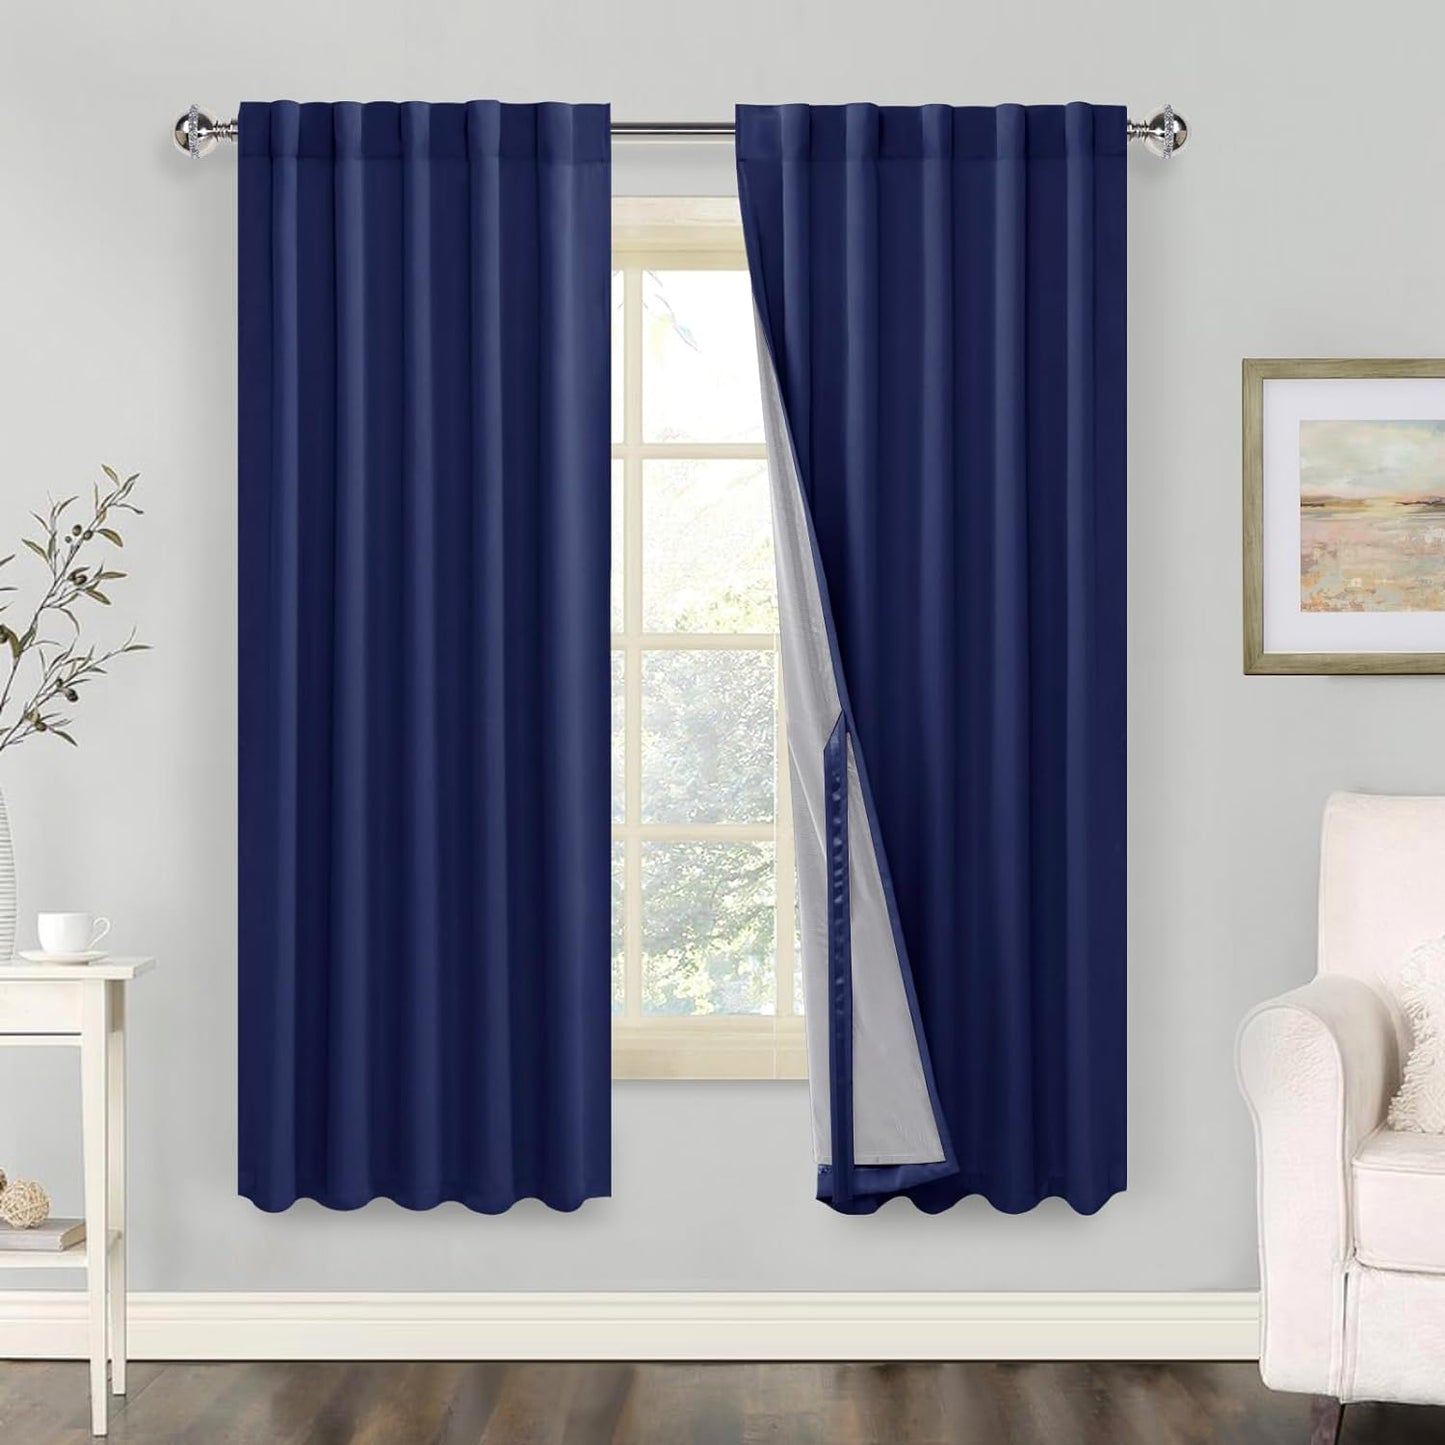 100% Blackout Curtains 2 Panels with Tiebacks- Heat and Full Light Blocking Window Treatment with Black Liner for Bedroom/Nursery, Rod Pocket & Back Tab，White, W52 X L84 Inches Long, Set of 2  XWZO Navy Blue W42" X L63"|2 Panels 